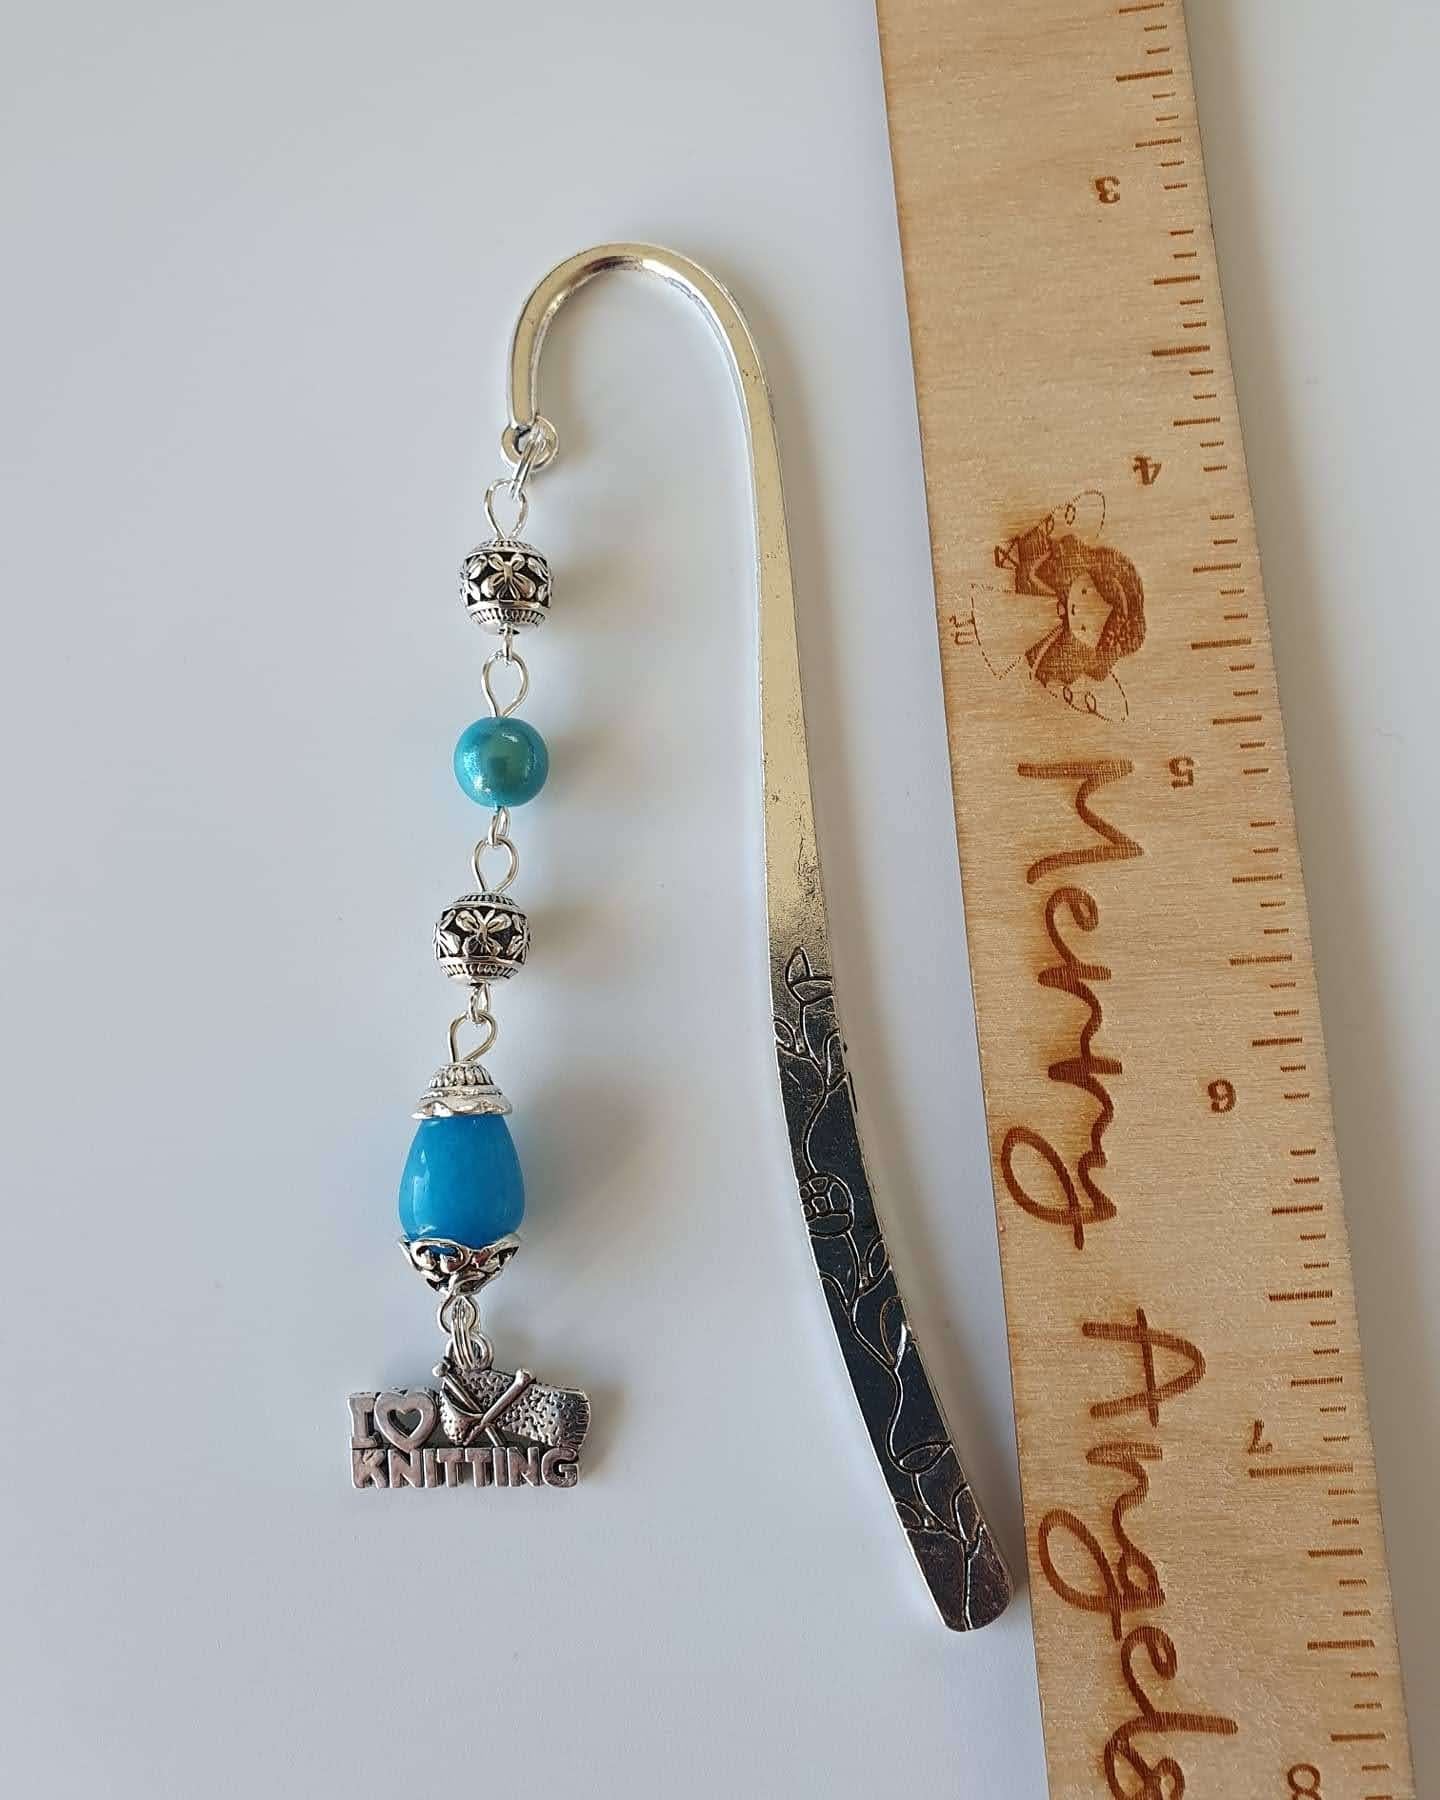 This is a picture of a silver bookmark with blue details and an 'I love knitting' charm on the end. 